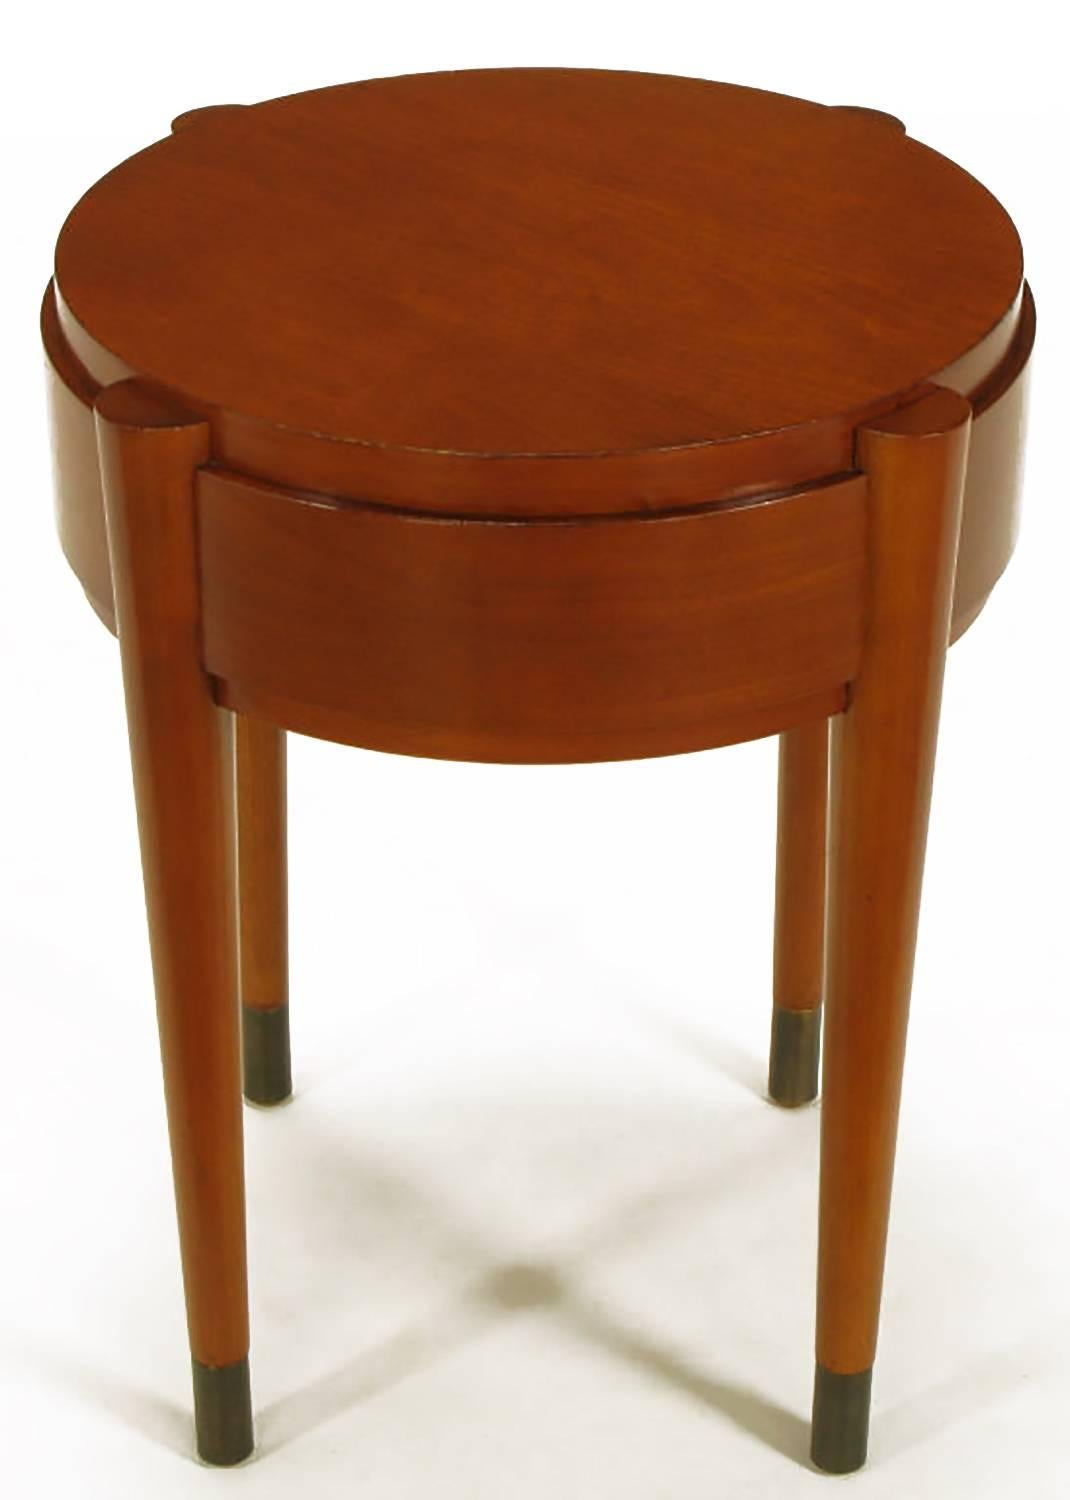 Pair of bentwood birch side tables stained red with tapered legs and dark brass sabots. Recessed top with half exposed legs.